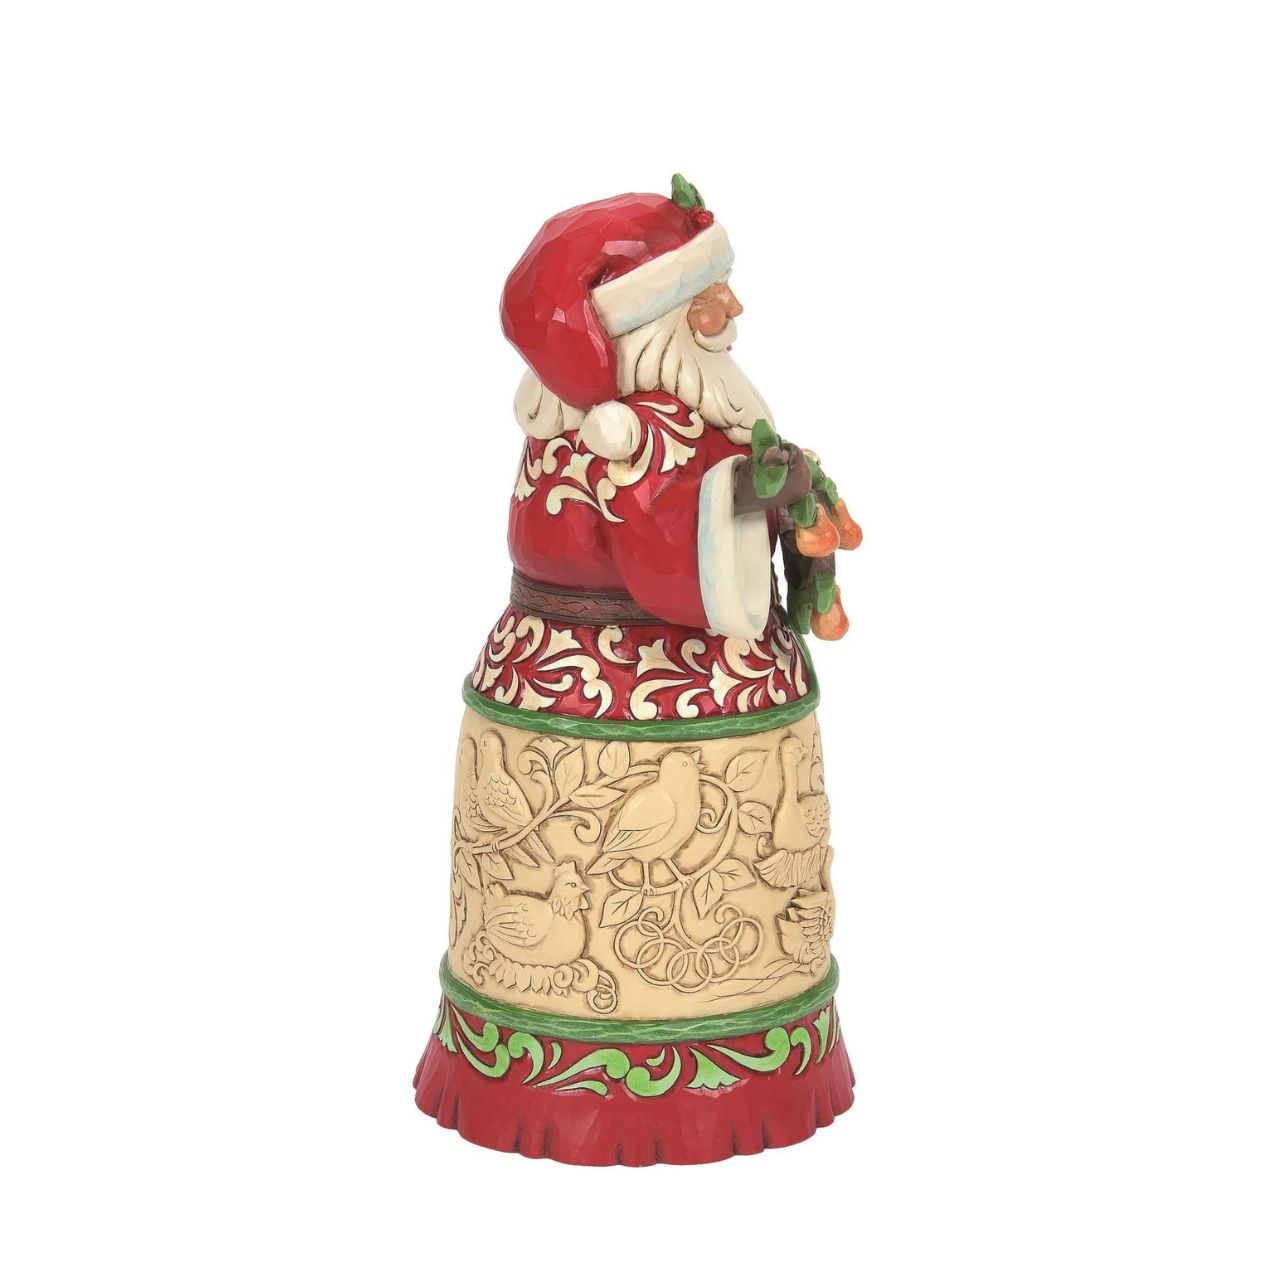 Heartwood Creek 12 Days of Christmas Santa Figurine World Wide Event  Designed by award winning artist Jim Shore as part of the Heartwood Creek World Wide Even for 2023, hand crafted using high quality cast stone and hand painted, this Santa figurine is perfect for the Christmas season.